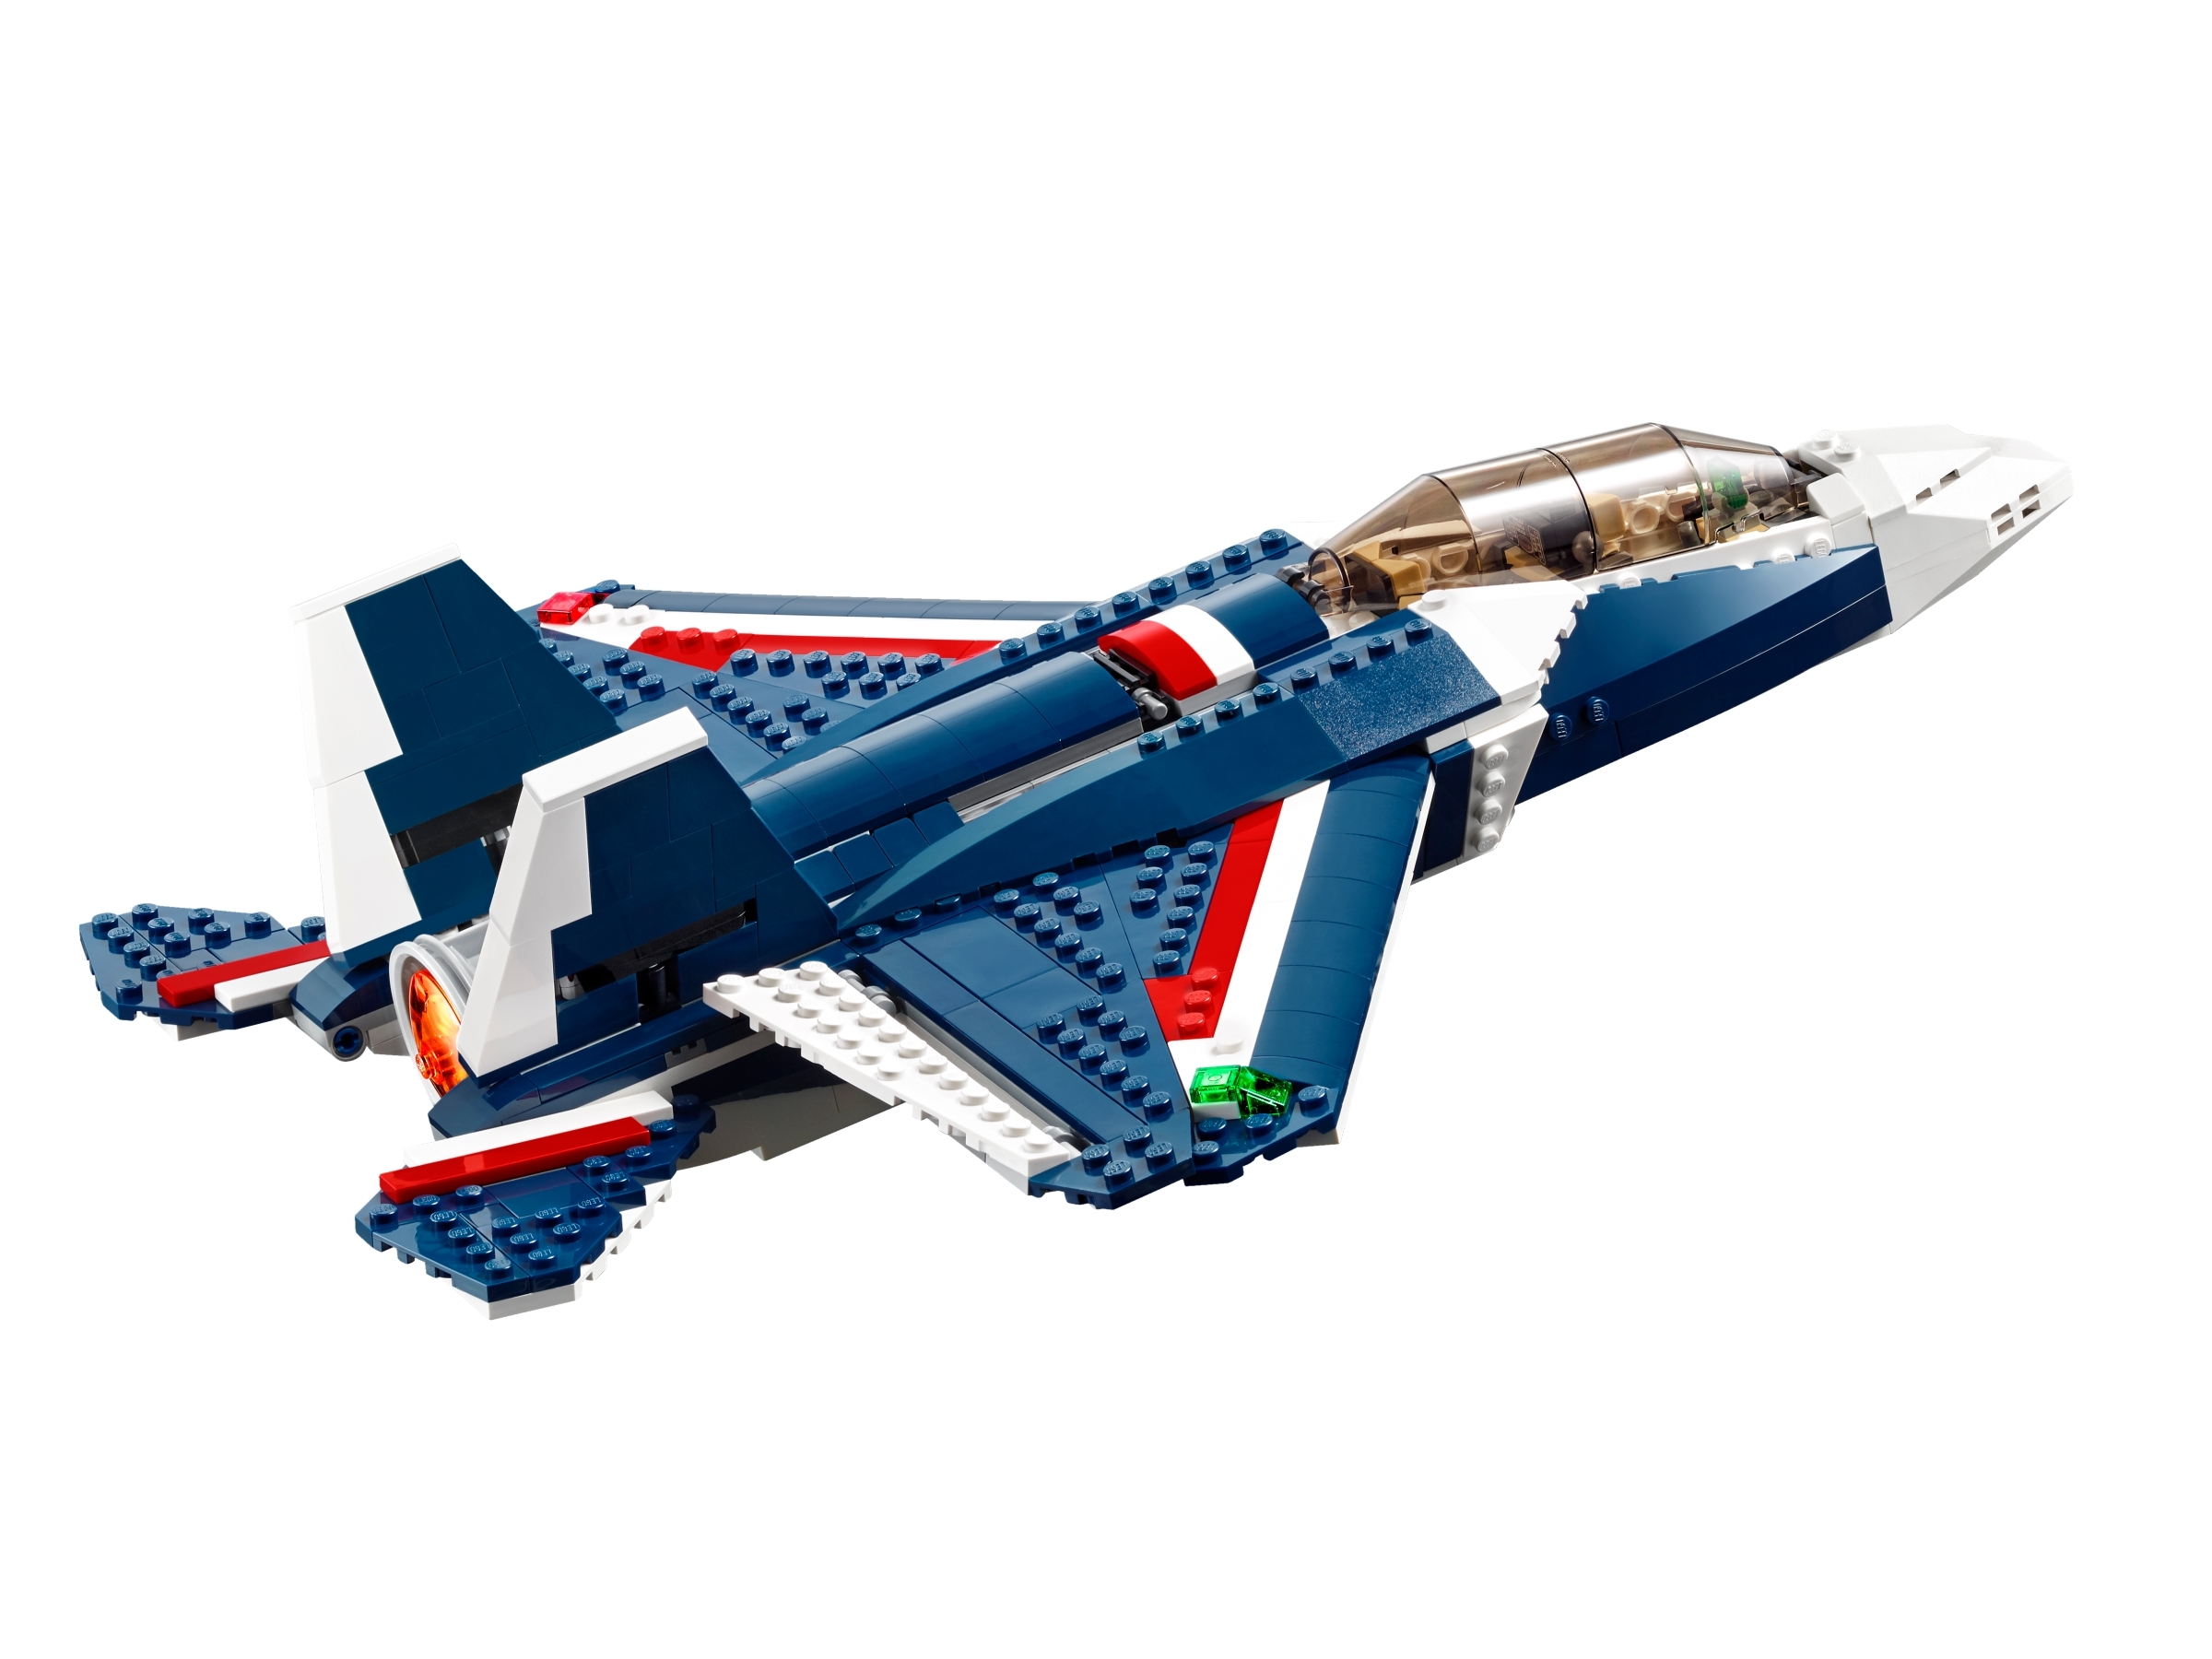 Blue Power Jet 31039 Creator 3-in-1 | Buy online at LEGO® Shop US